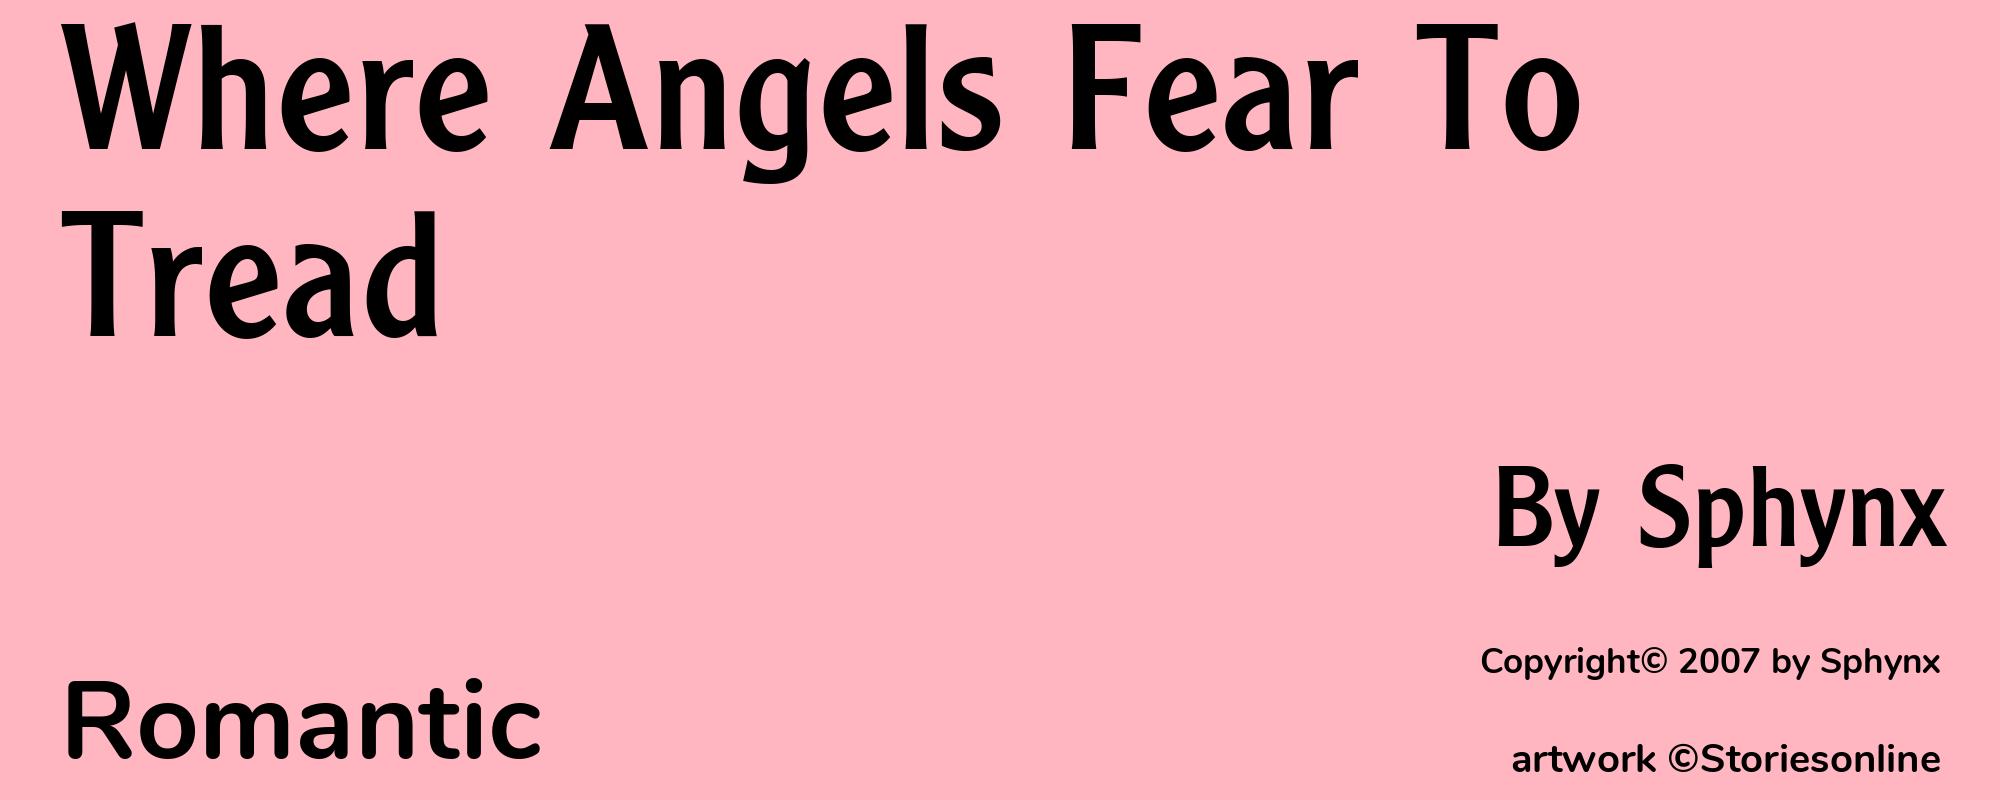 Where Angels Fear To Tread - Cover